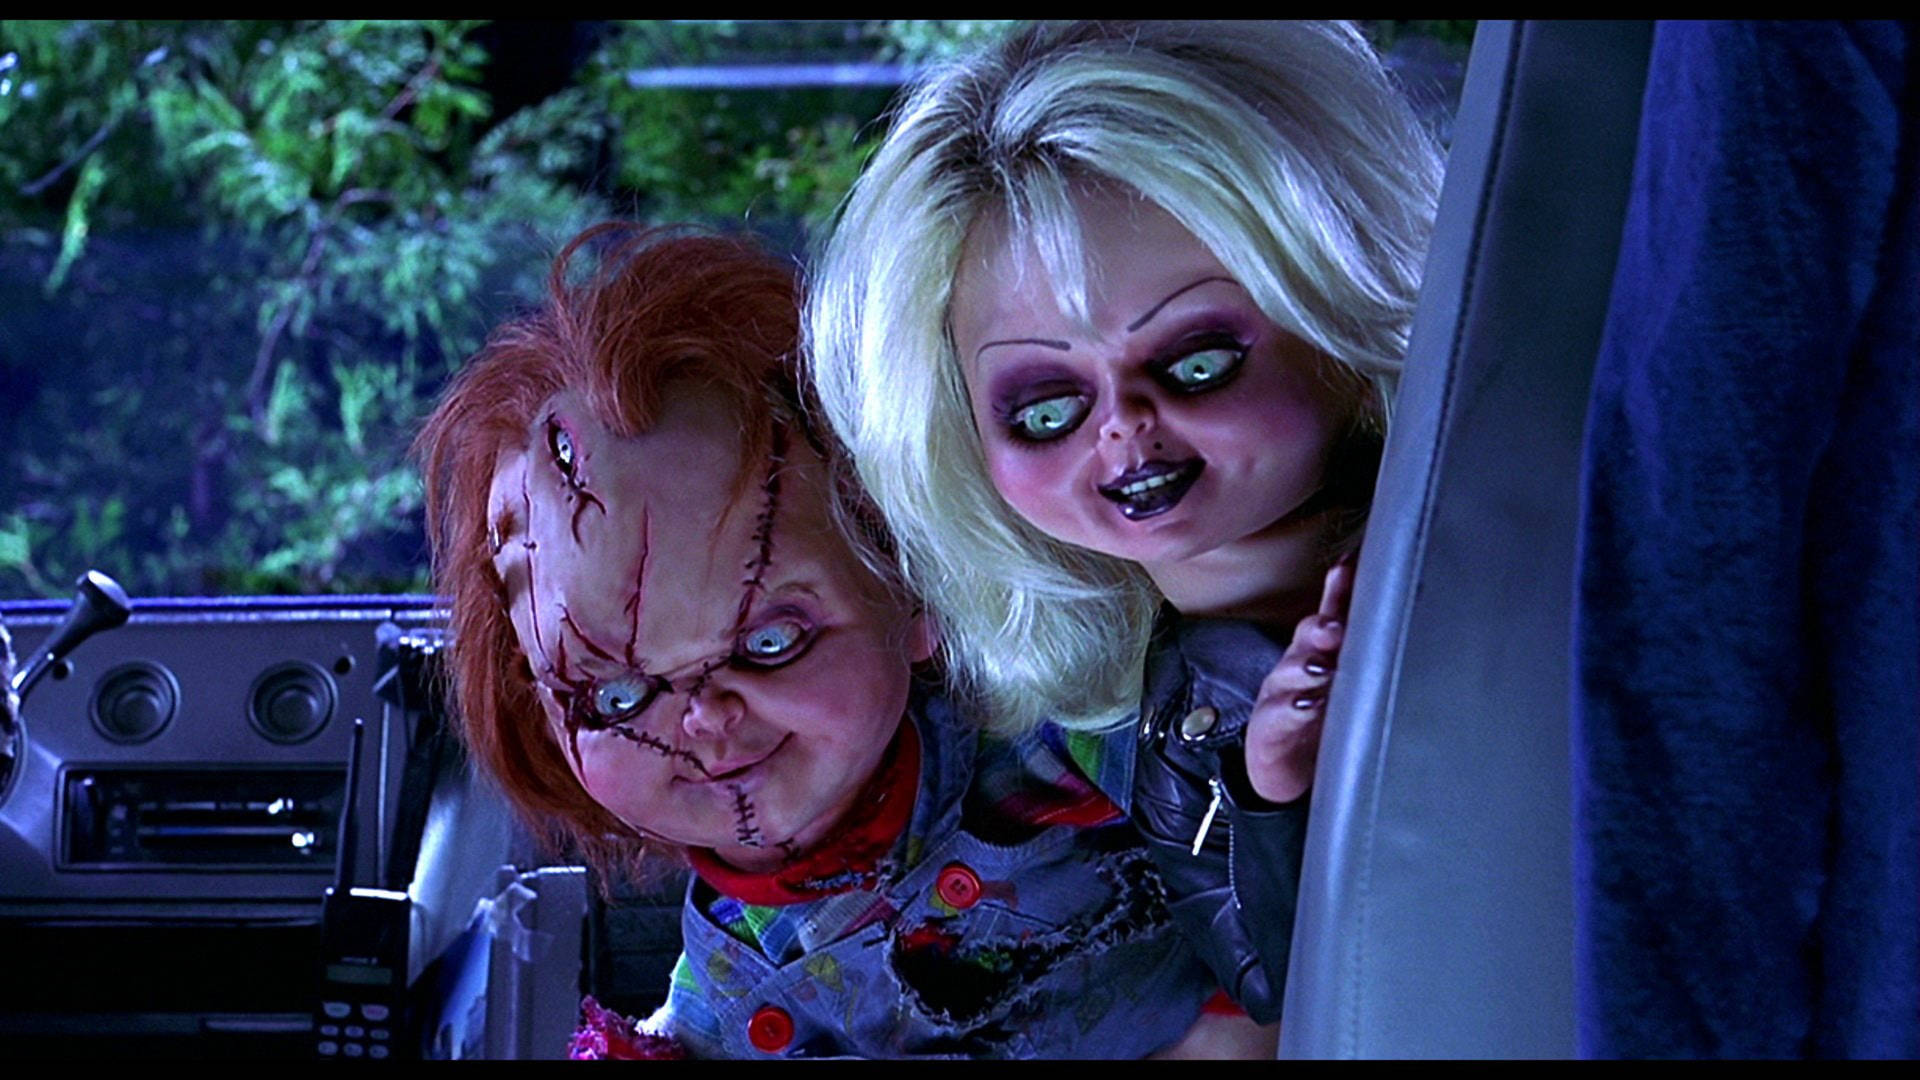 Child's Play Chucky And Tiffany In Car Background